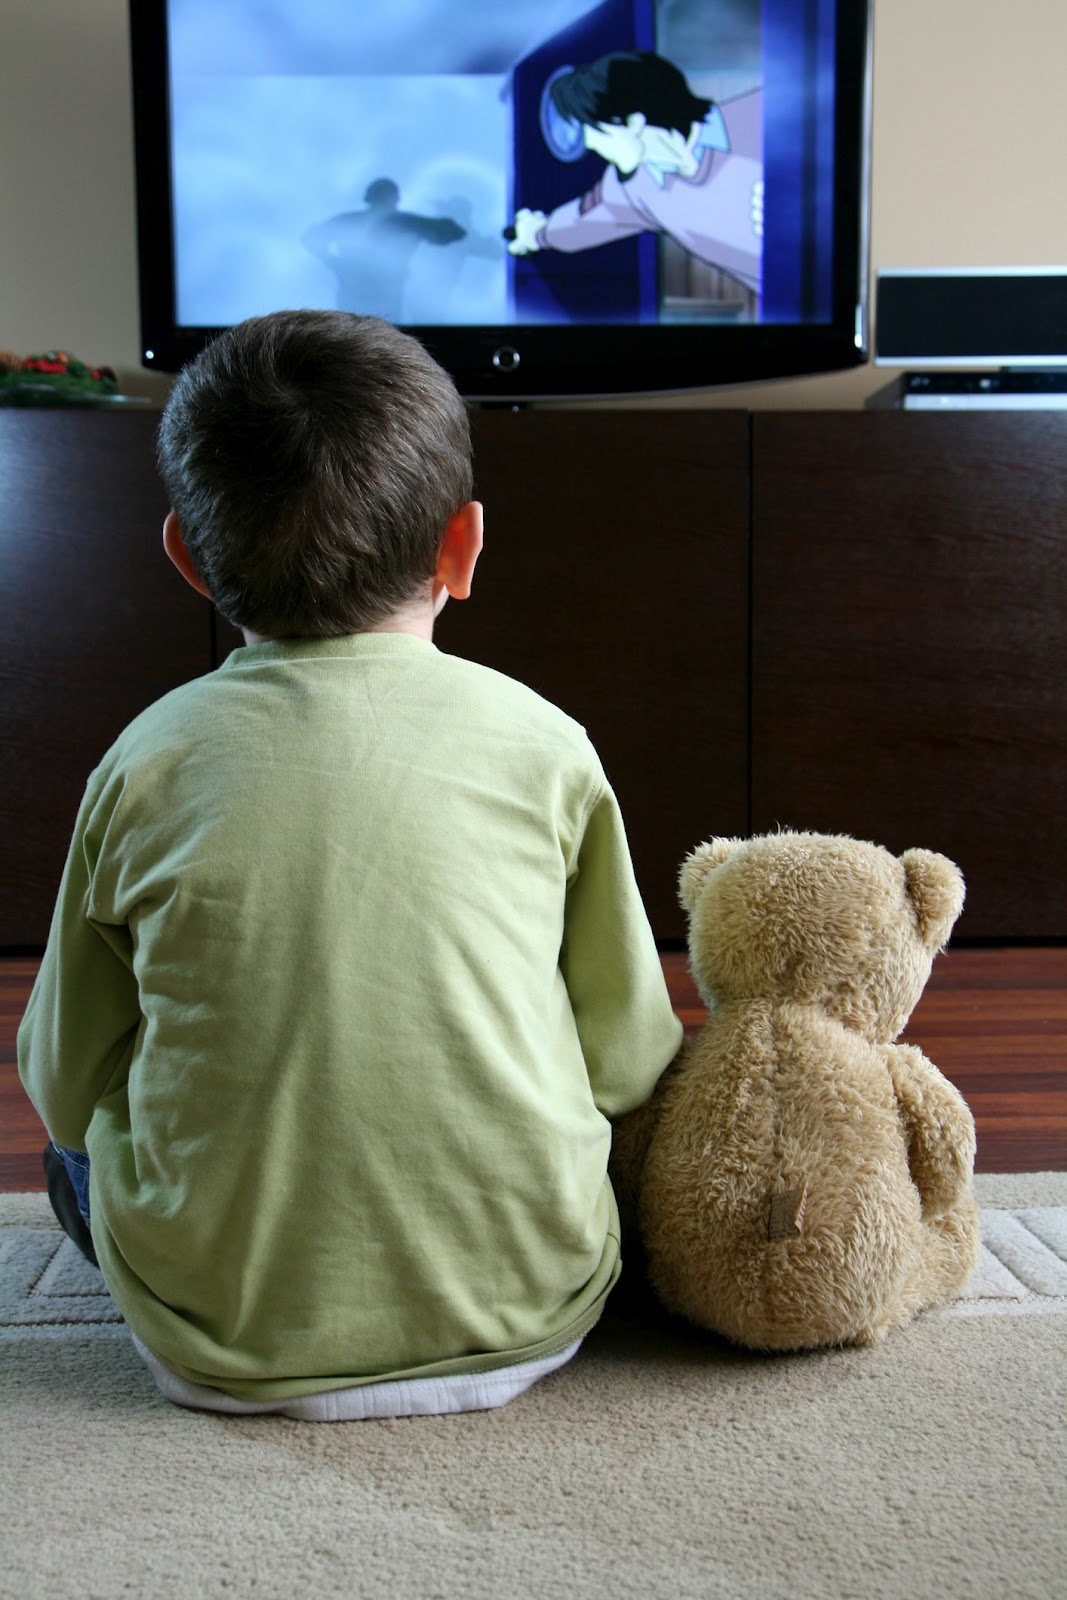 "PETITE FRAME": Television Effects on Children